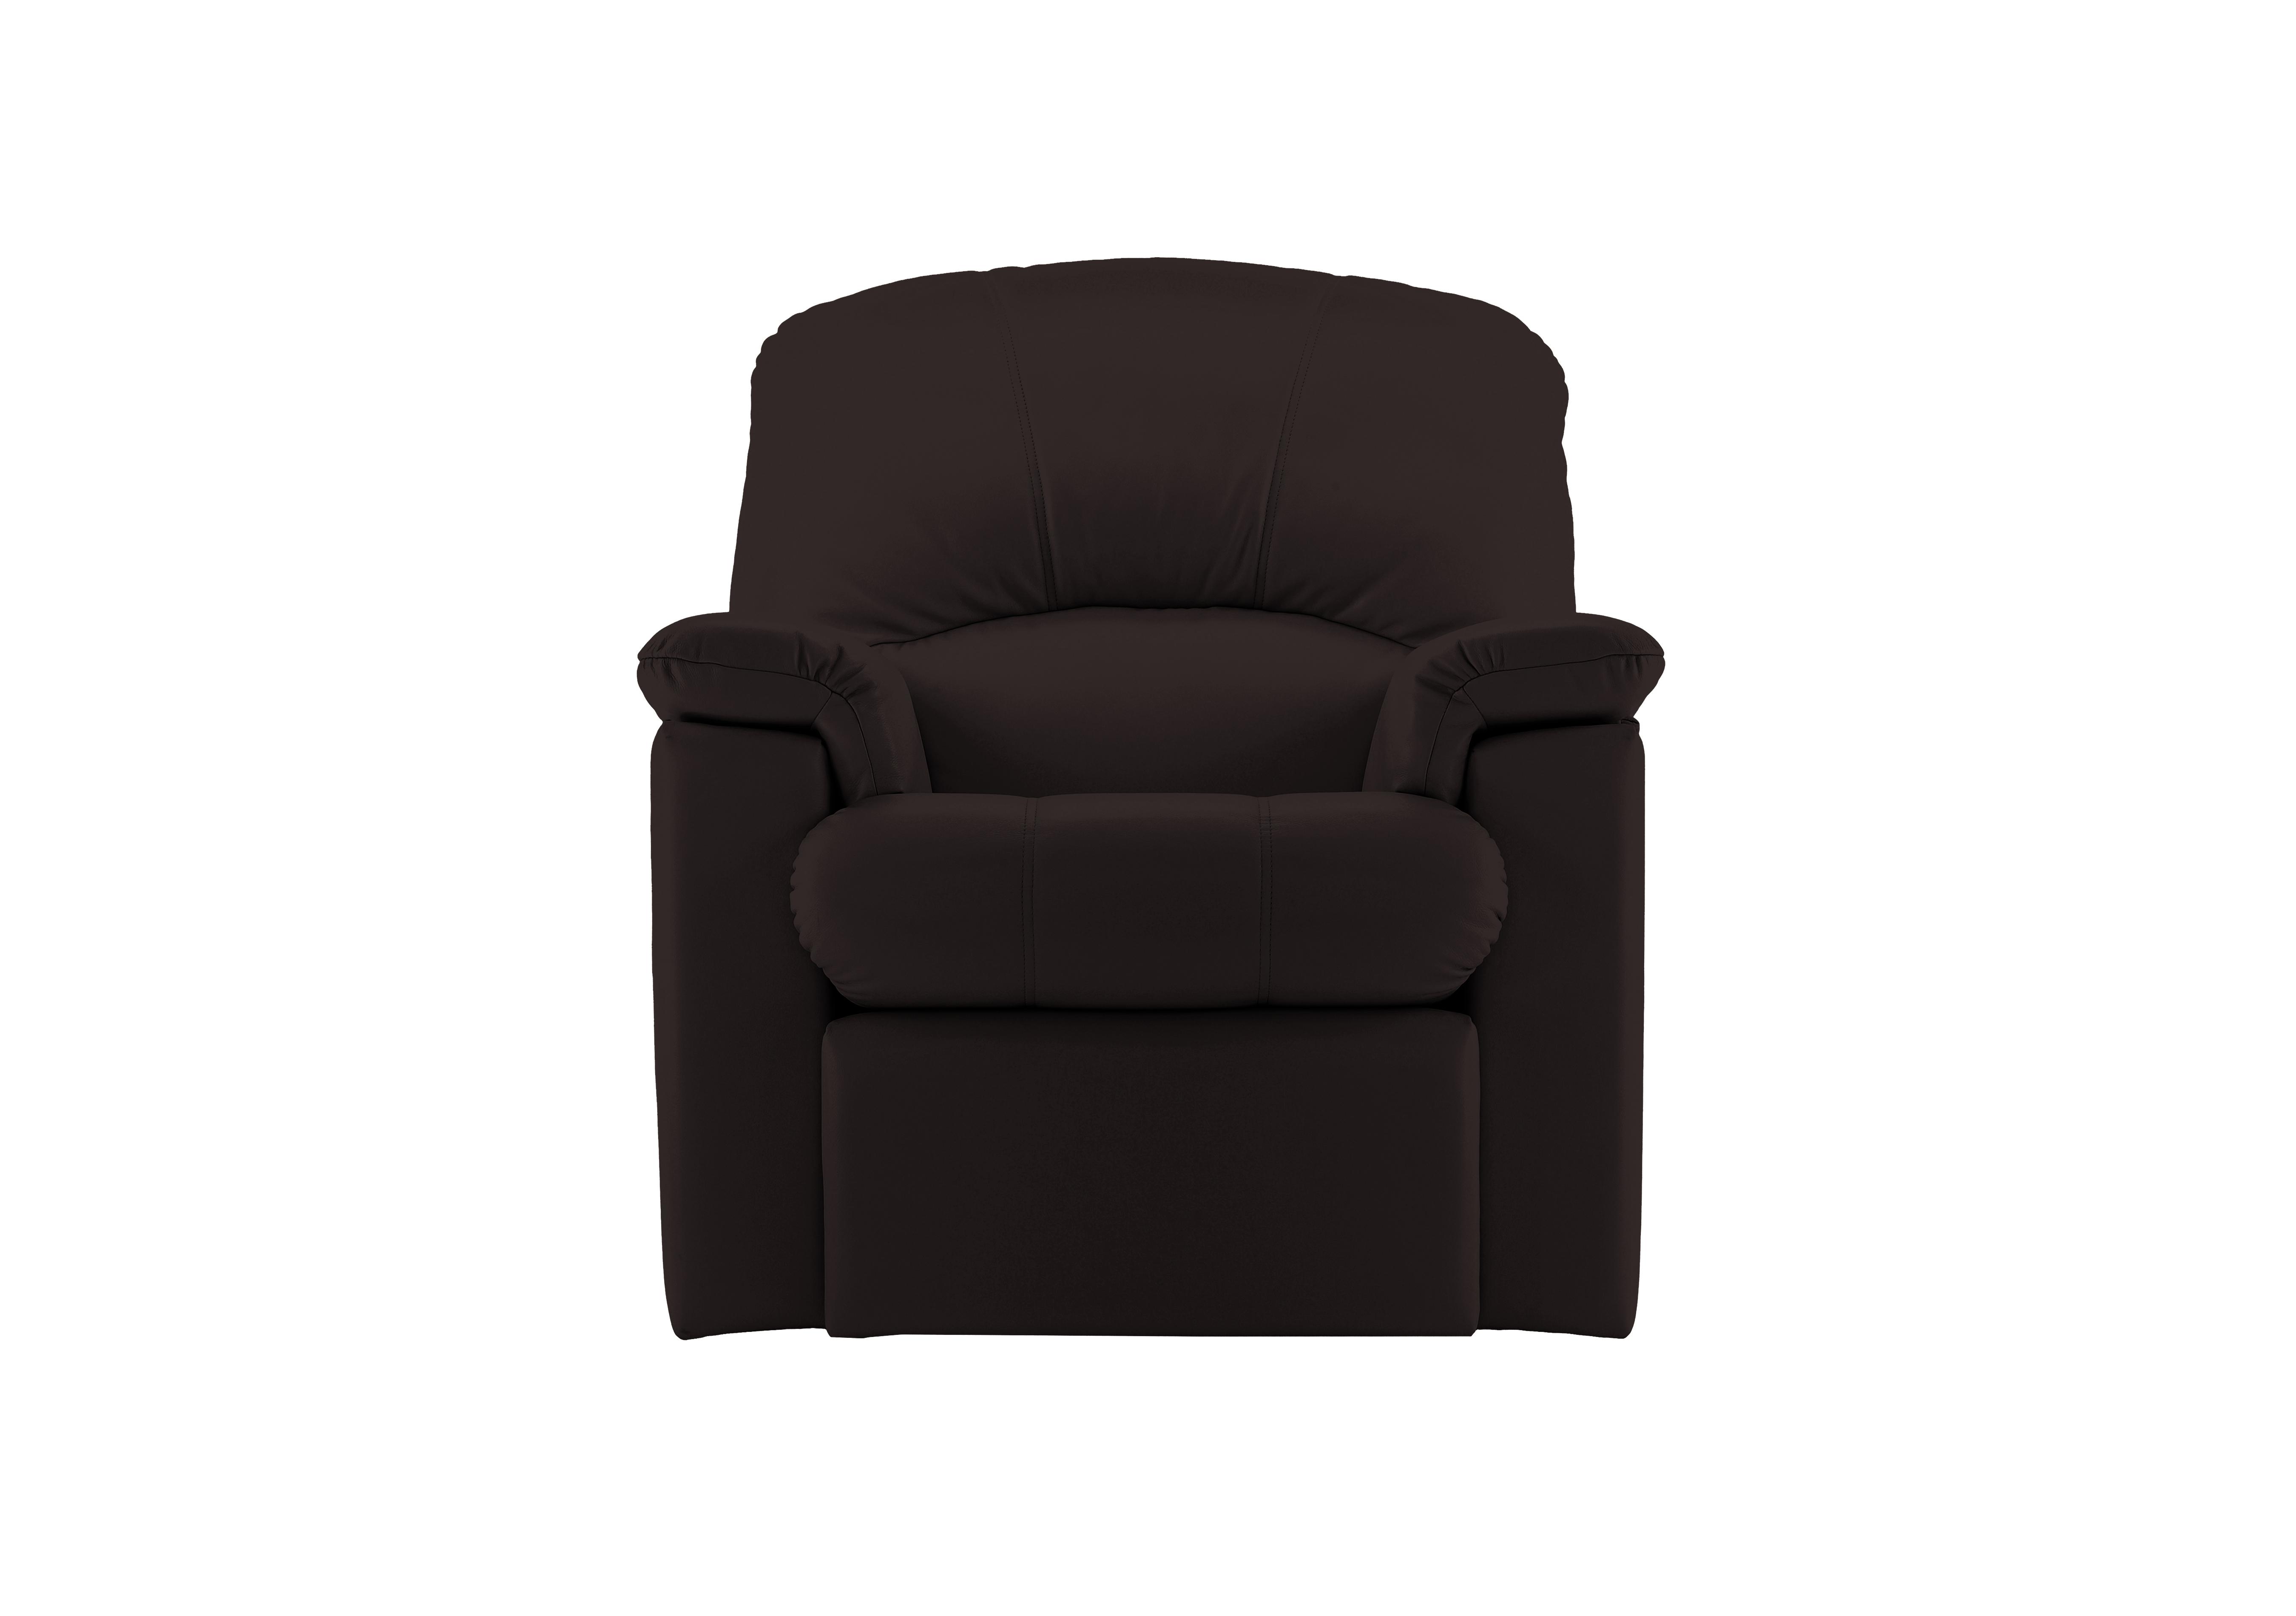 Chloe Small Leather Armchair in P200 Capri Chocolate on Furniture Village